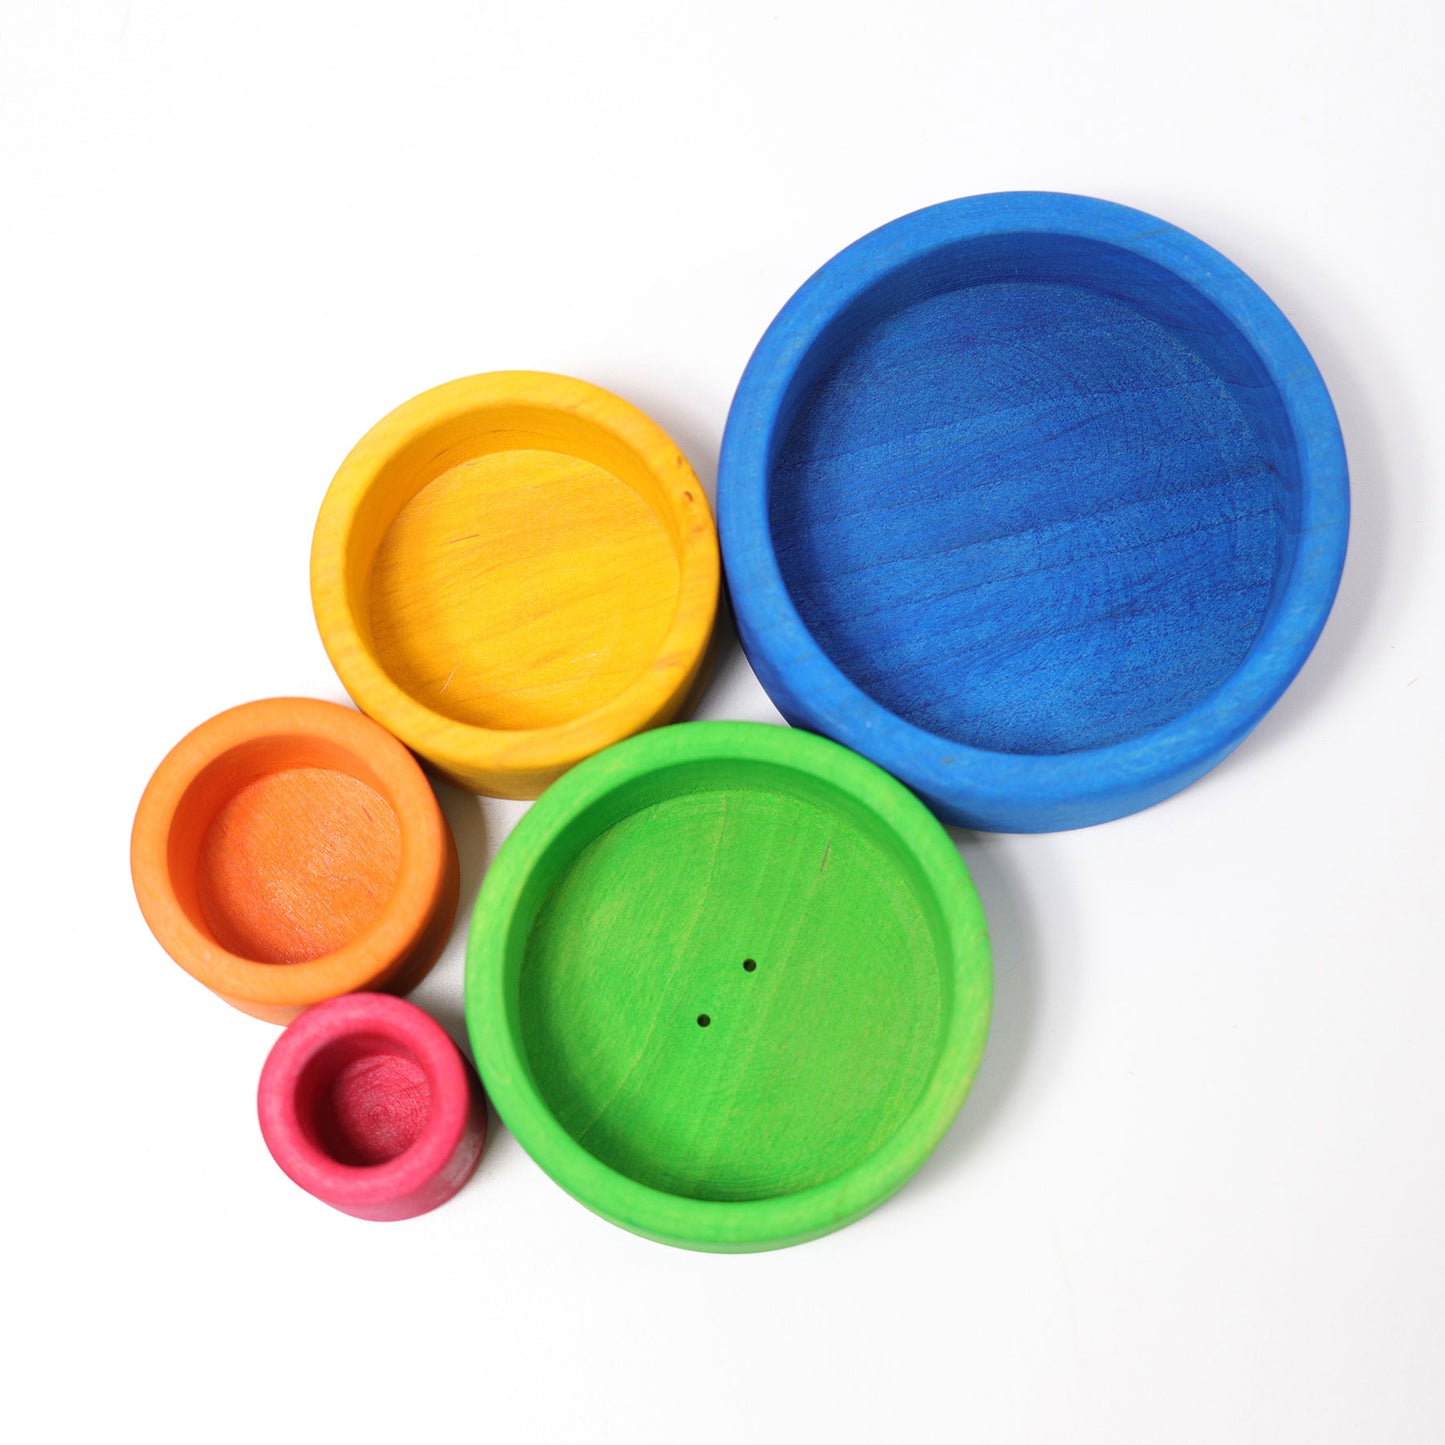 Grimm's Wooden Colorful Blue Nesting Bowls